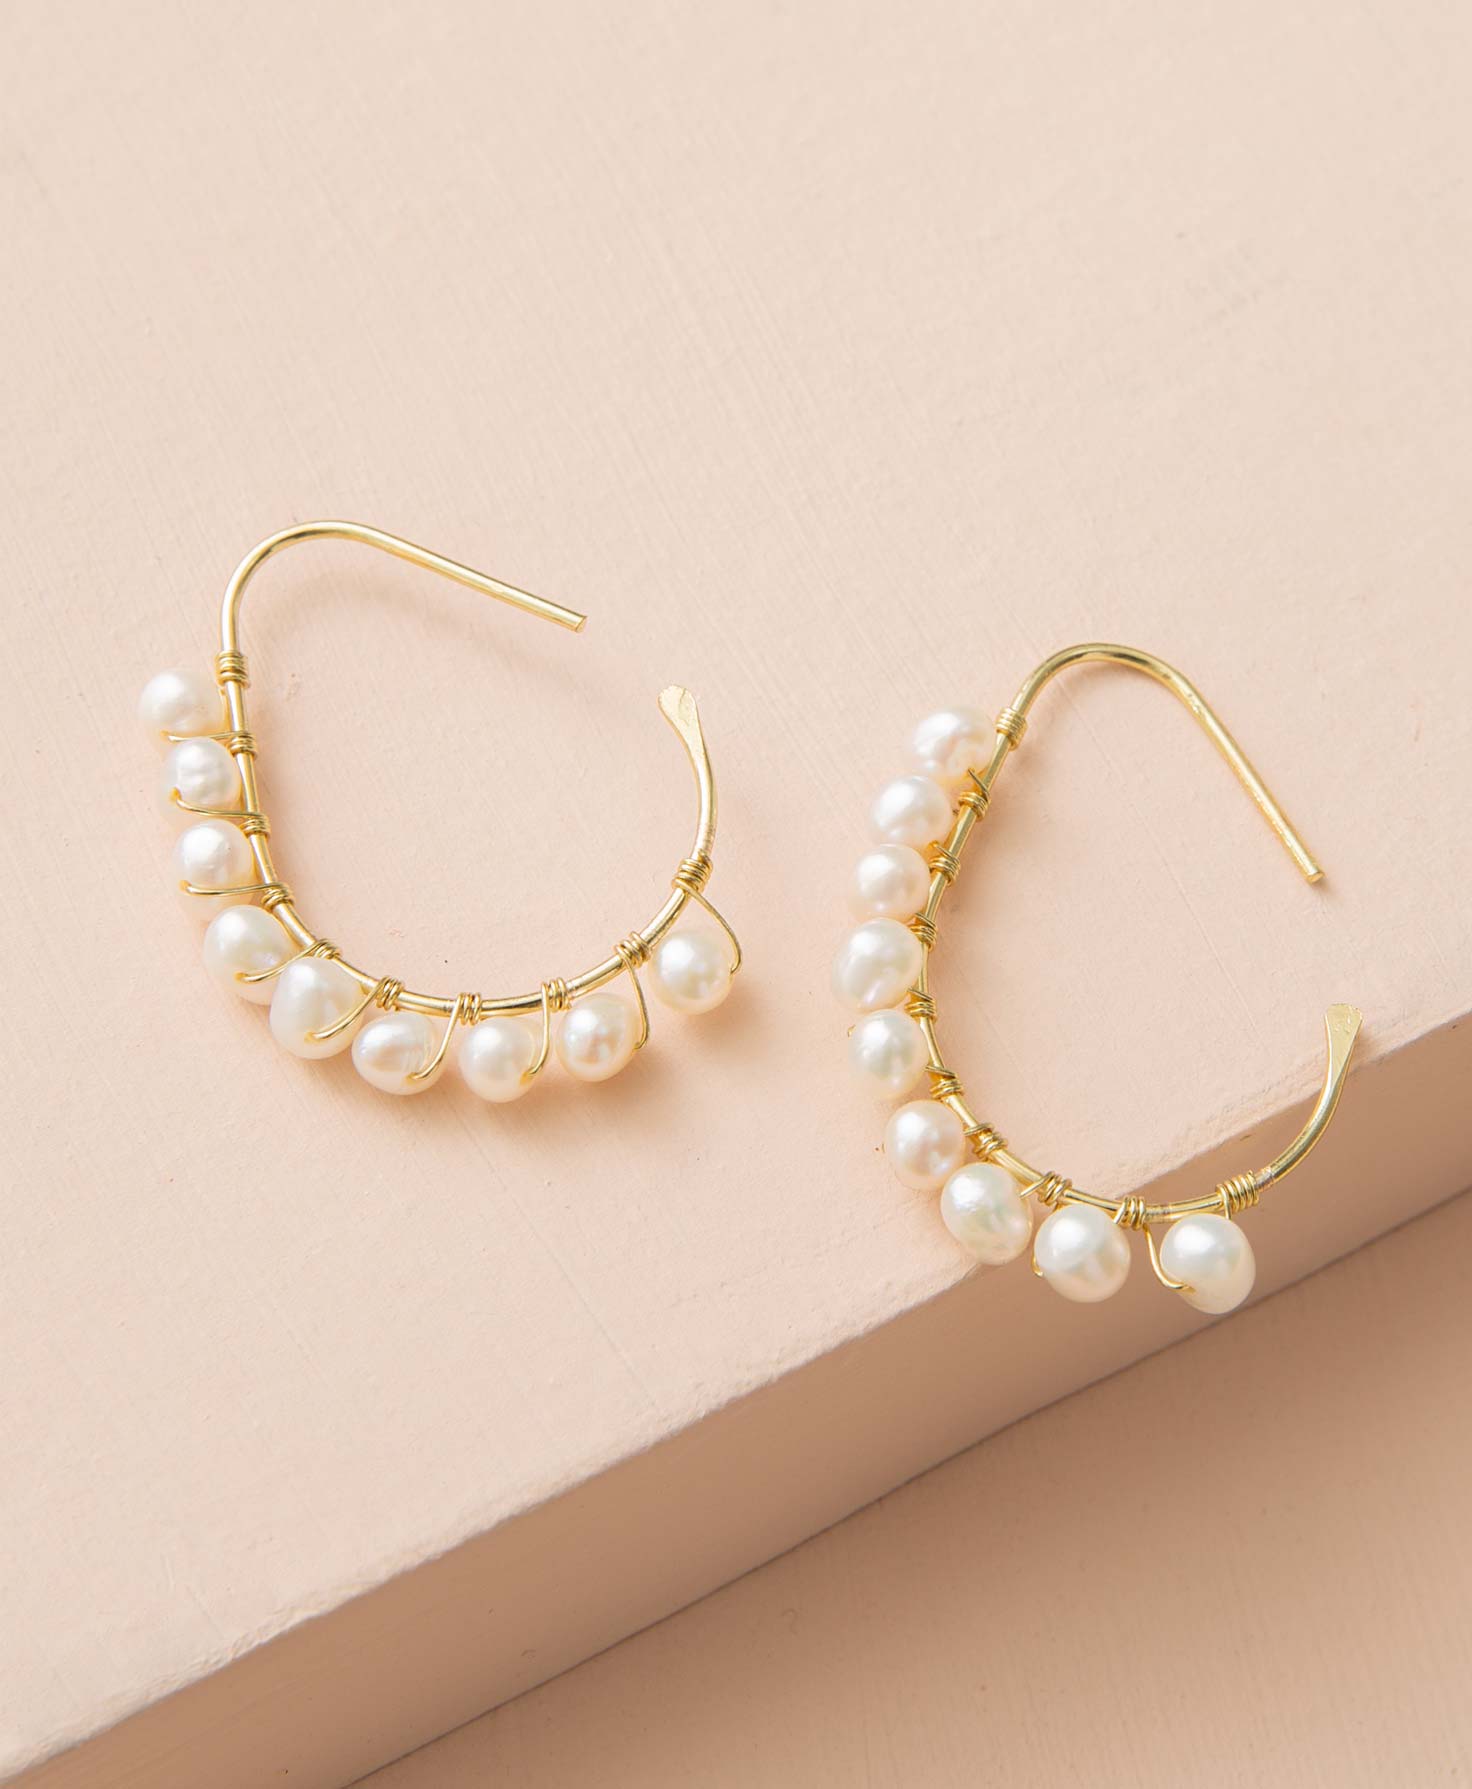 The League Earrings lay flat on a peach colored background. A gold wire forms the base of the earrings, and is looped around to form an oblong hoop shape. Attached along the hoop via gold wire is a row of 9 genuine pearls. The pearls vary slightly in size and shape and have a natural feel. 